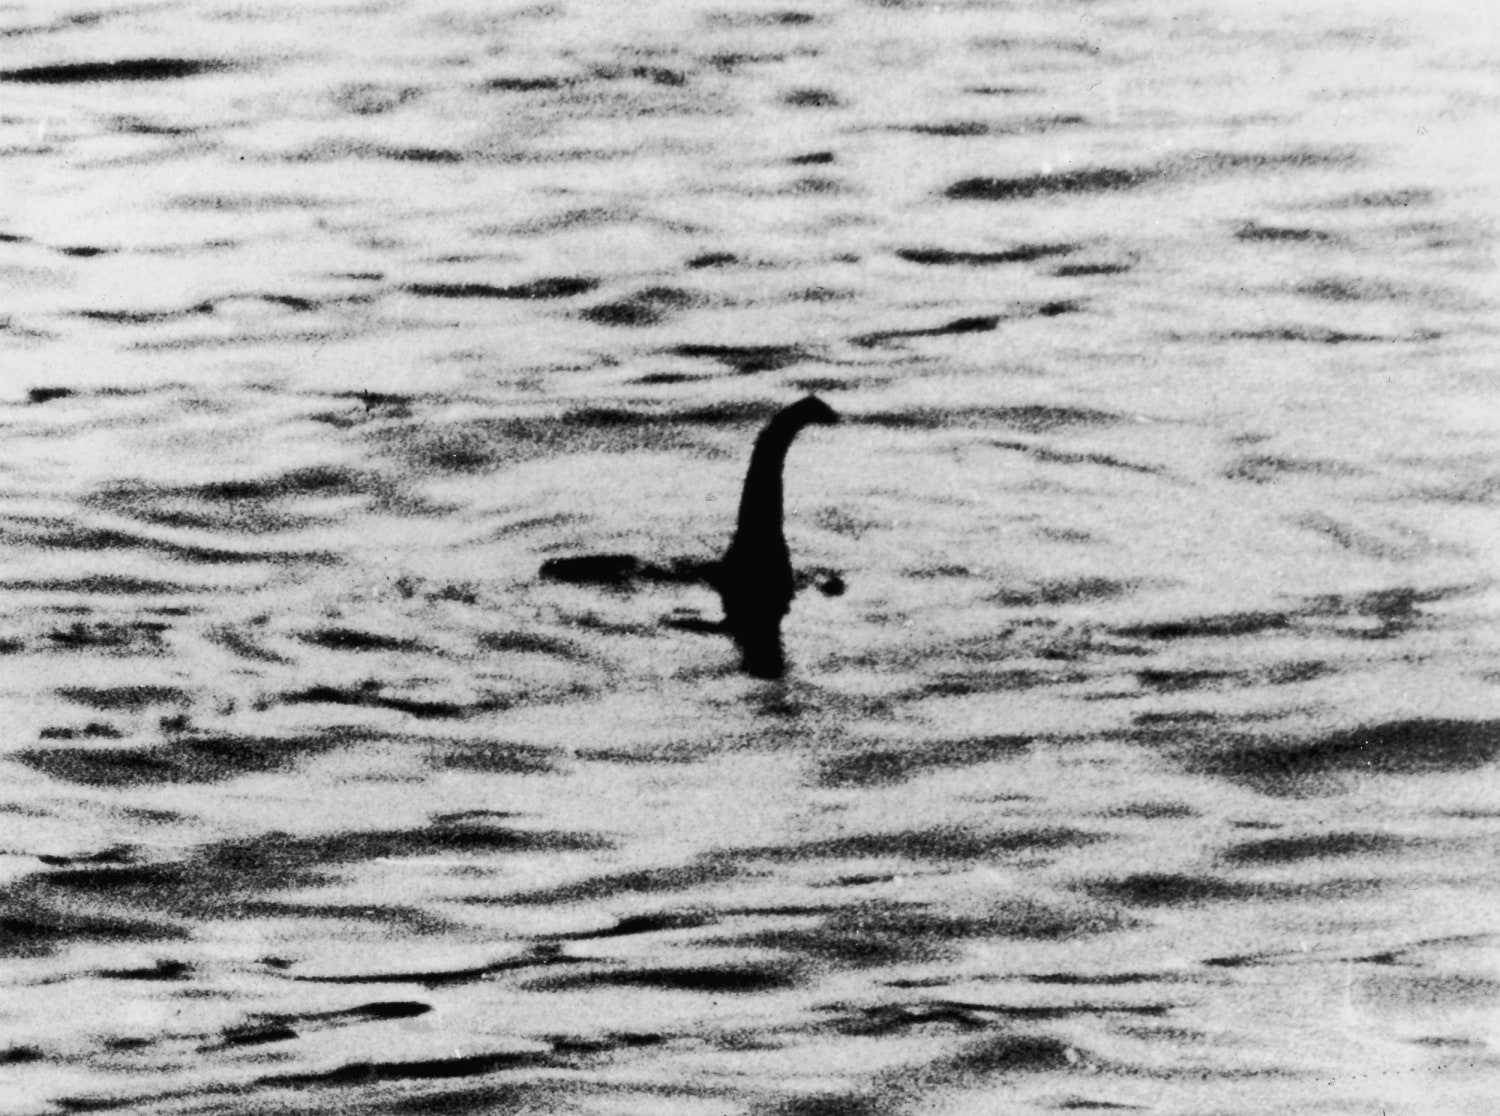 New study suggests mythical loch ness monster may be a giant eel